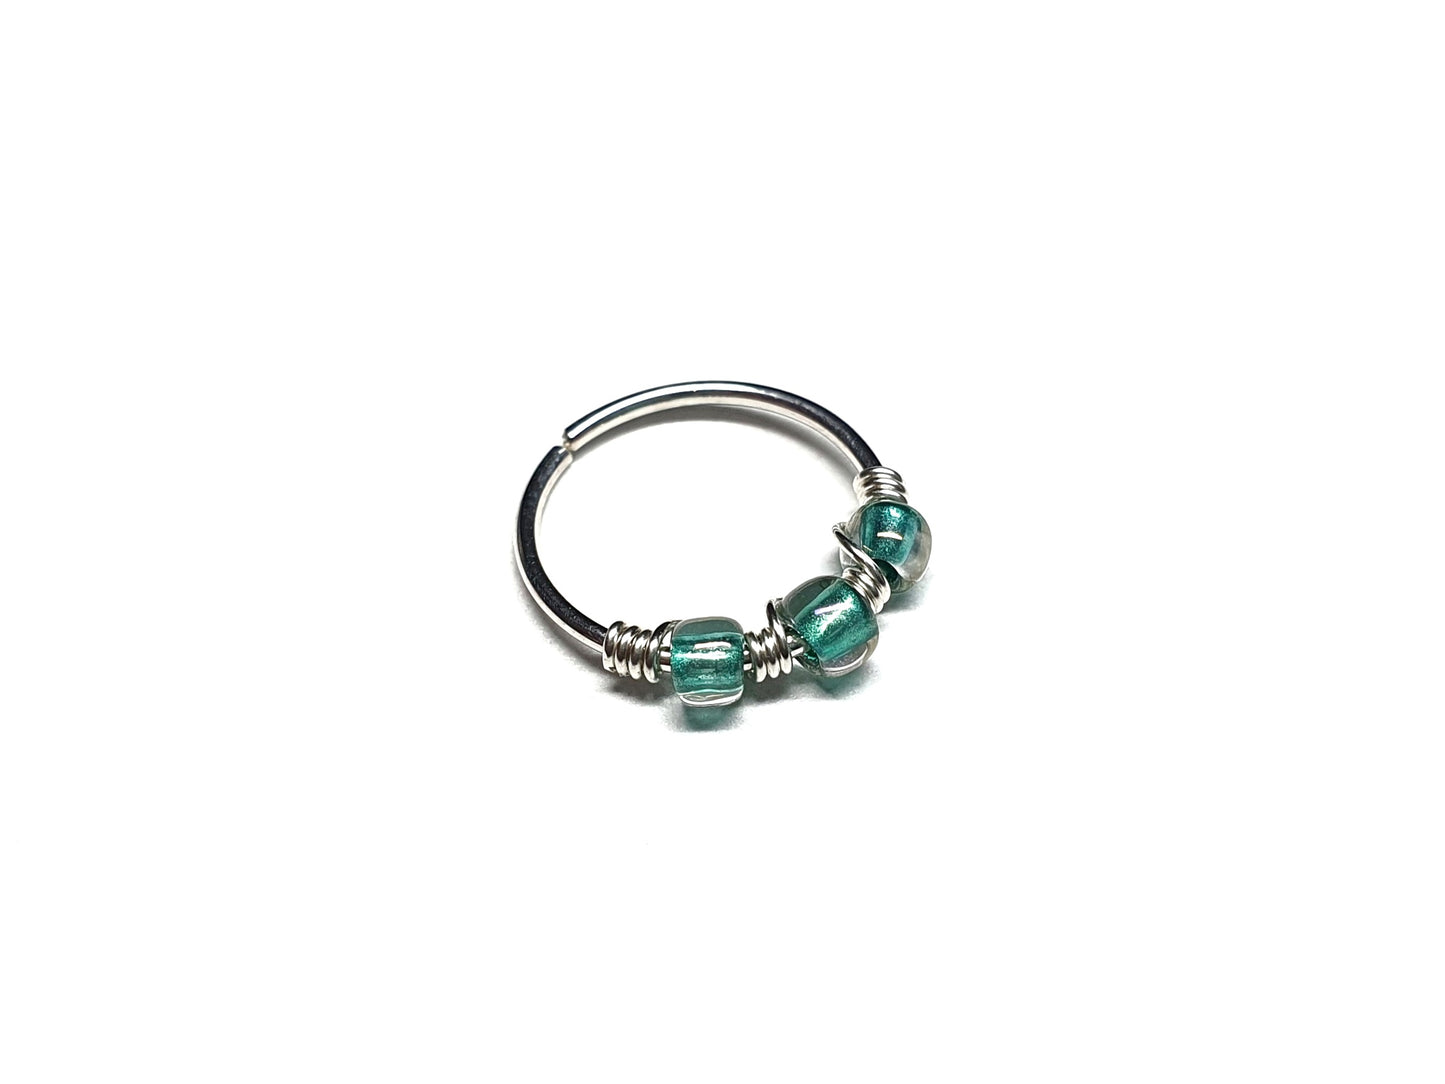 Clear Turquoise Sterling Silver Helix Cartilage Seamless Hoop 20g 8mm or 10mm Inside Diameter